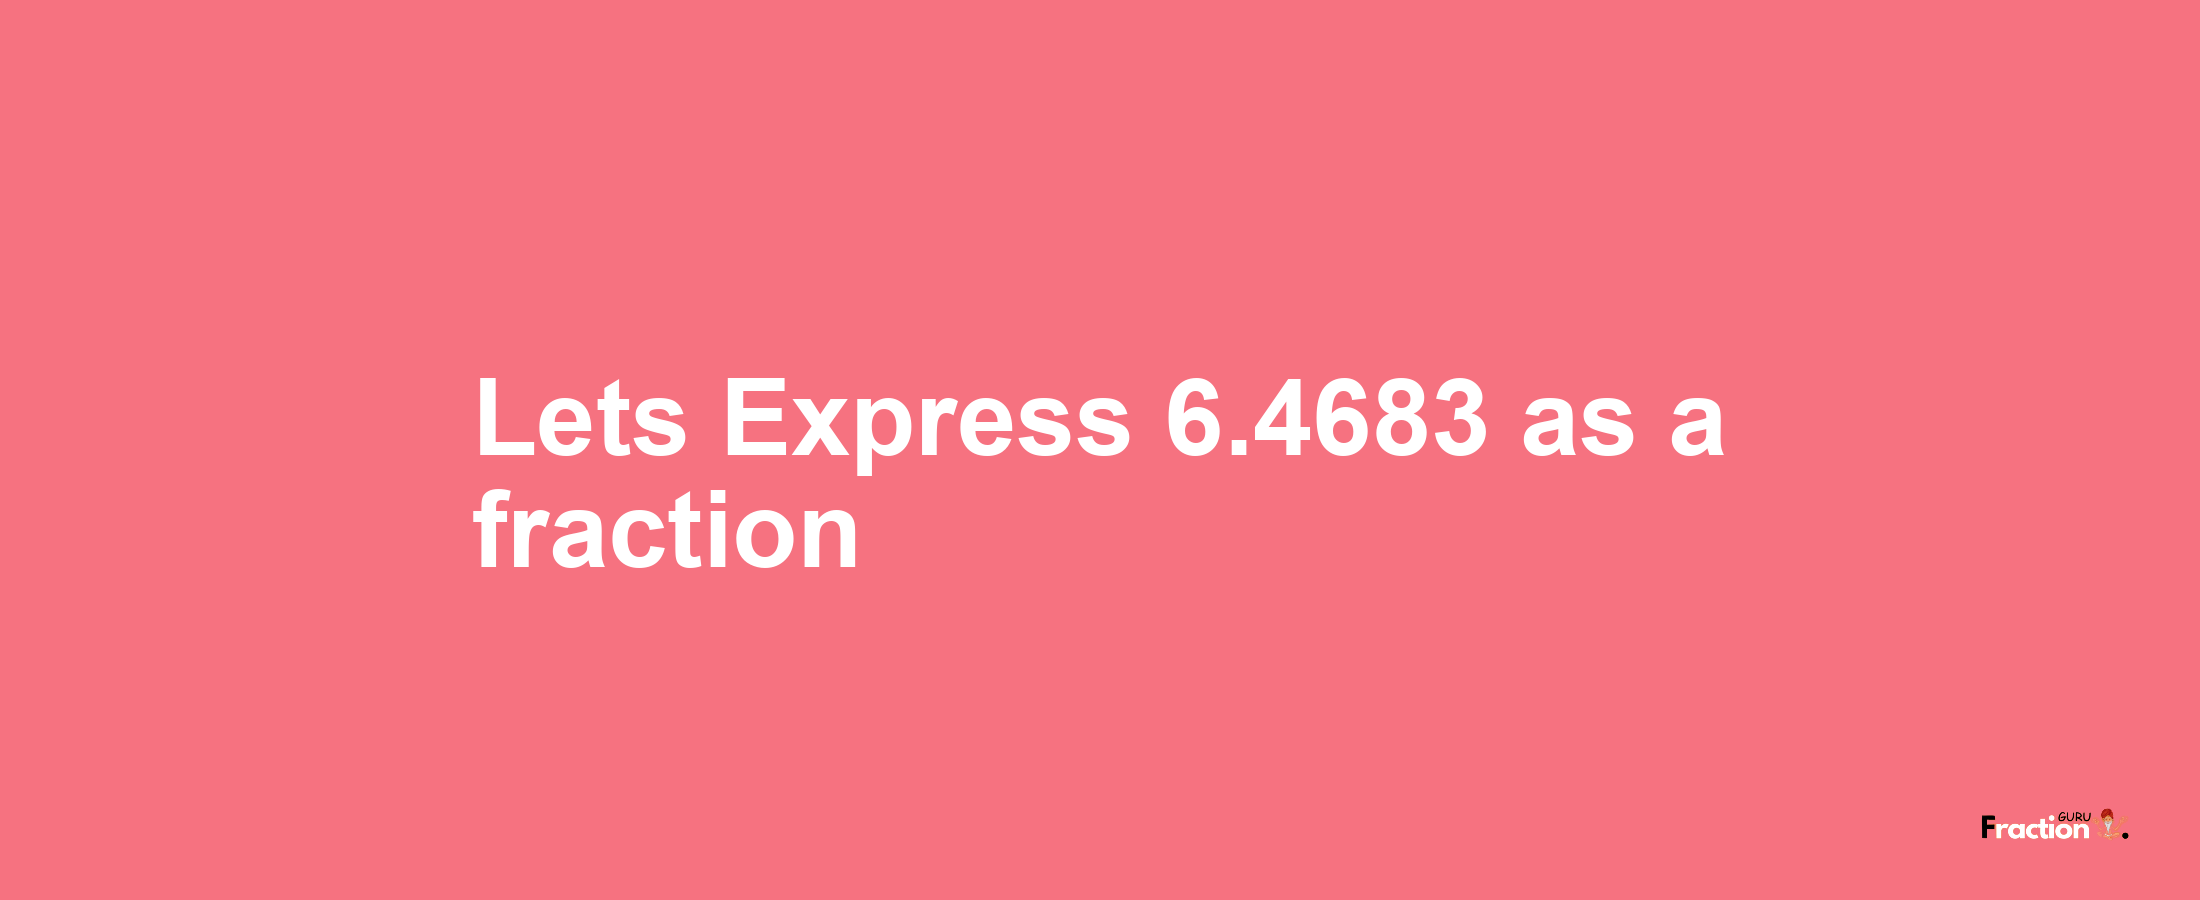 Lets Express 6.4683 as afraction